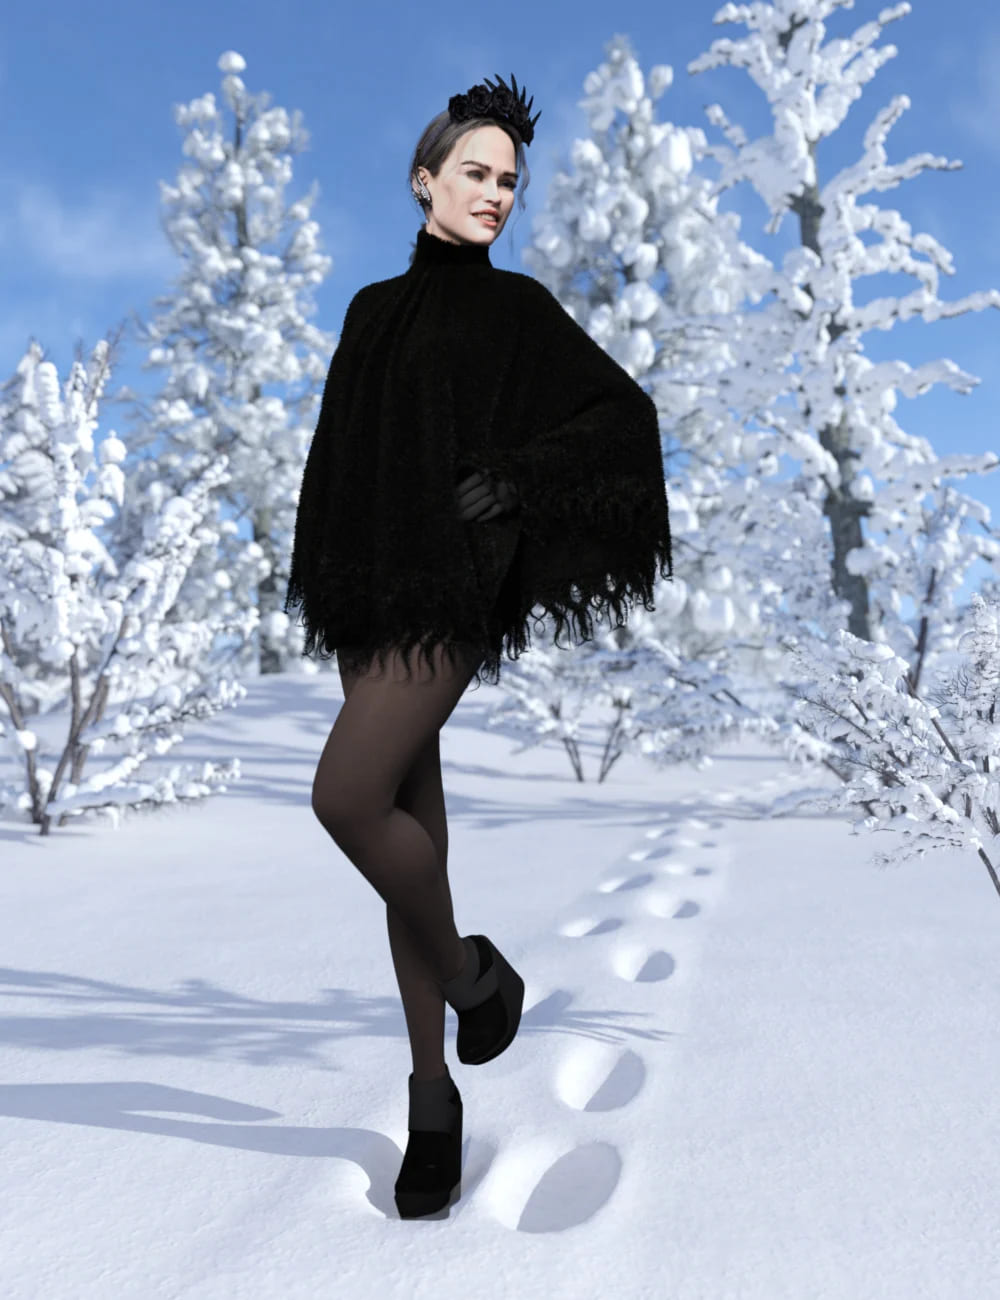 dForce Sexy Winter Outfit for Genesis 8.1 Female_DAZ3D下载站